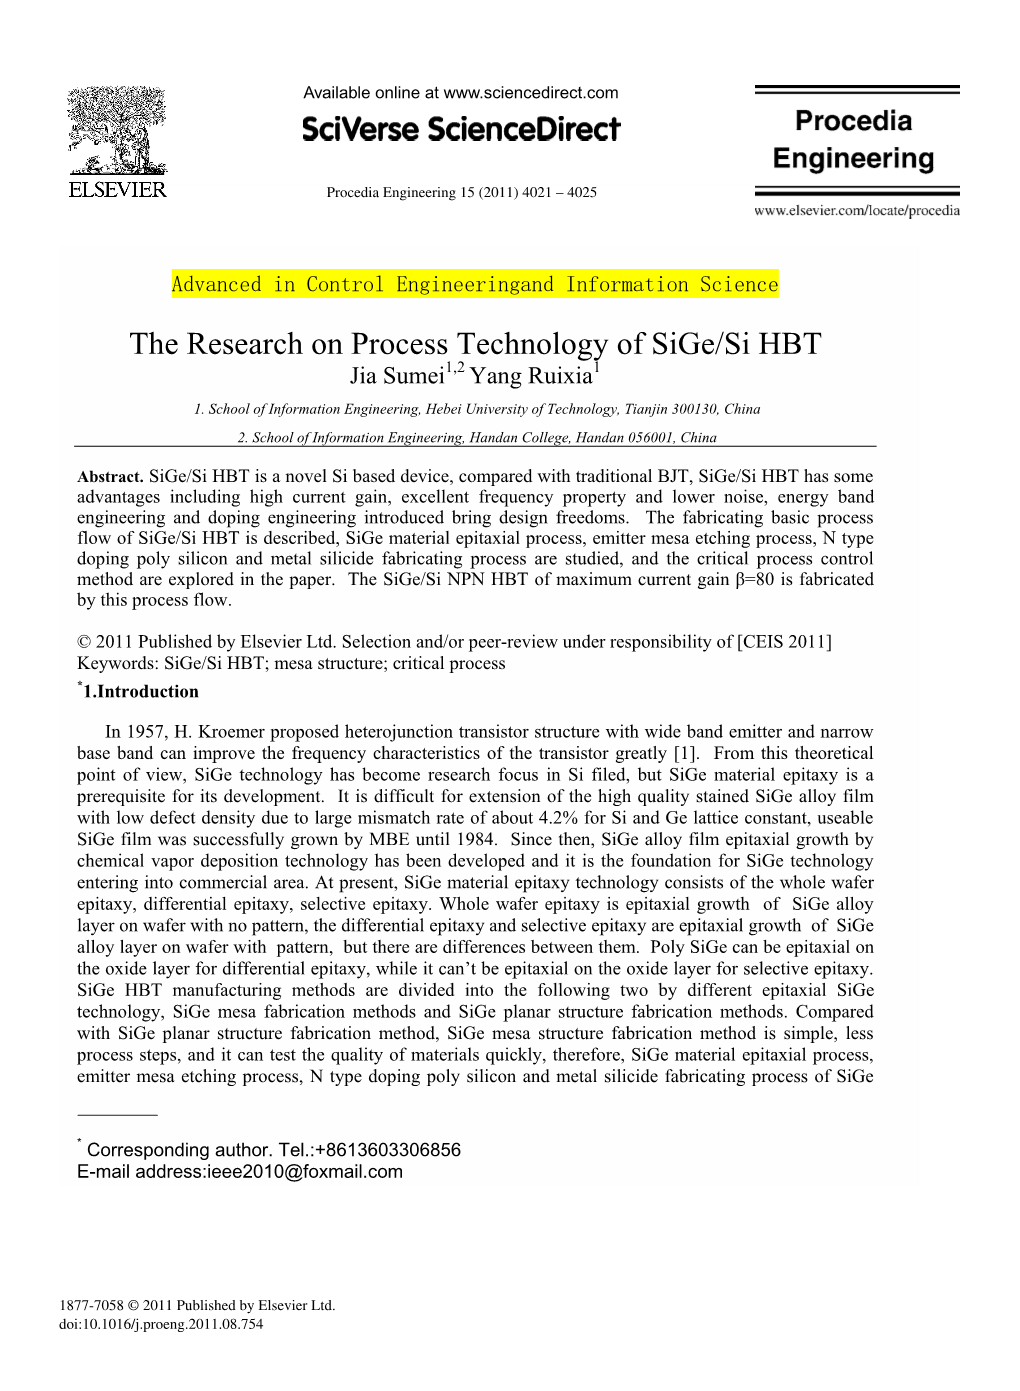 The Research on Process Technology of Sige/Si HBT Jia Sumei1,2 Yang Ruixia1 1